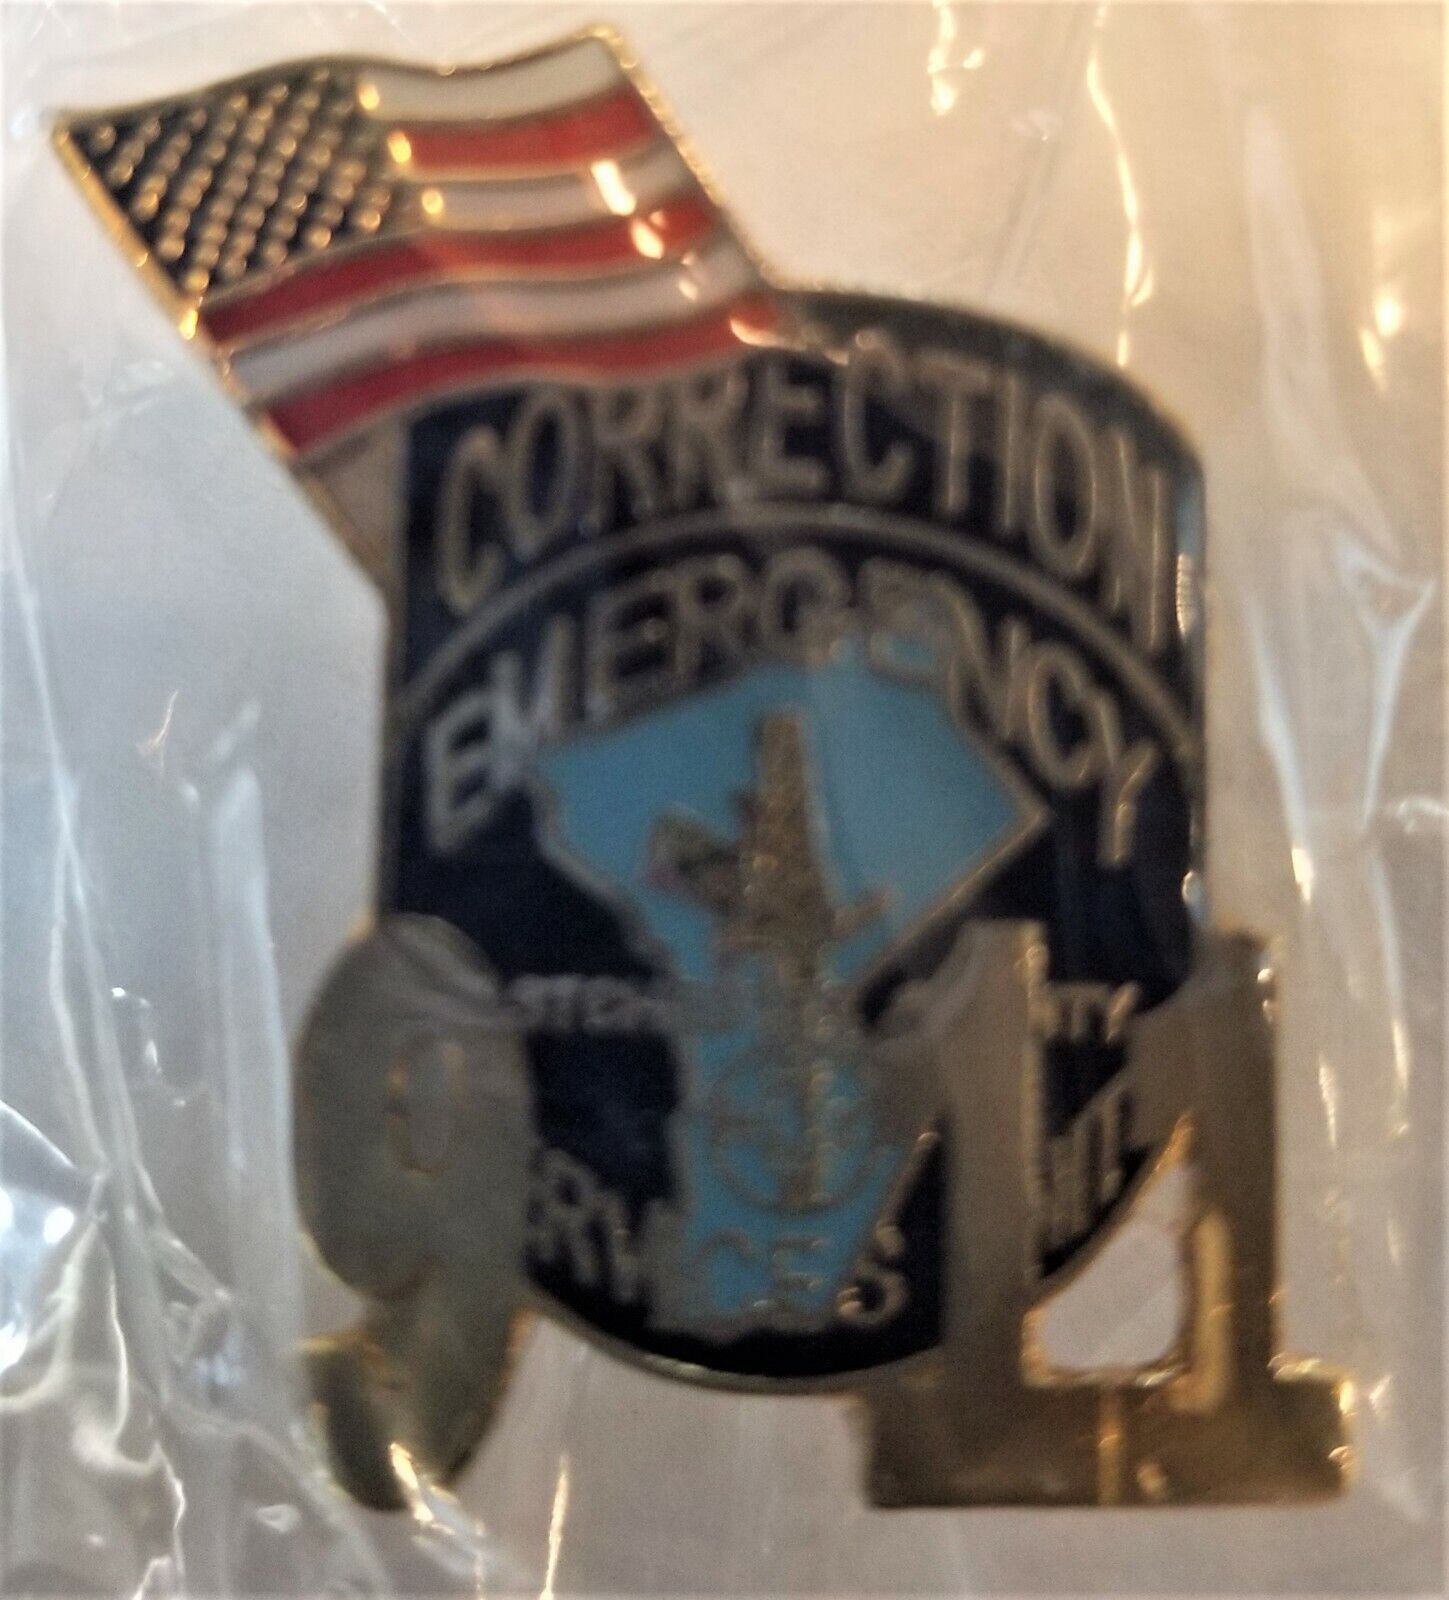 9/11 CORRECTION EMERGENCY SERVICES W/FLAG COMMEMORATIVE PIN